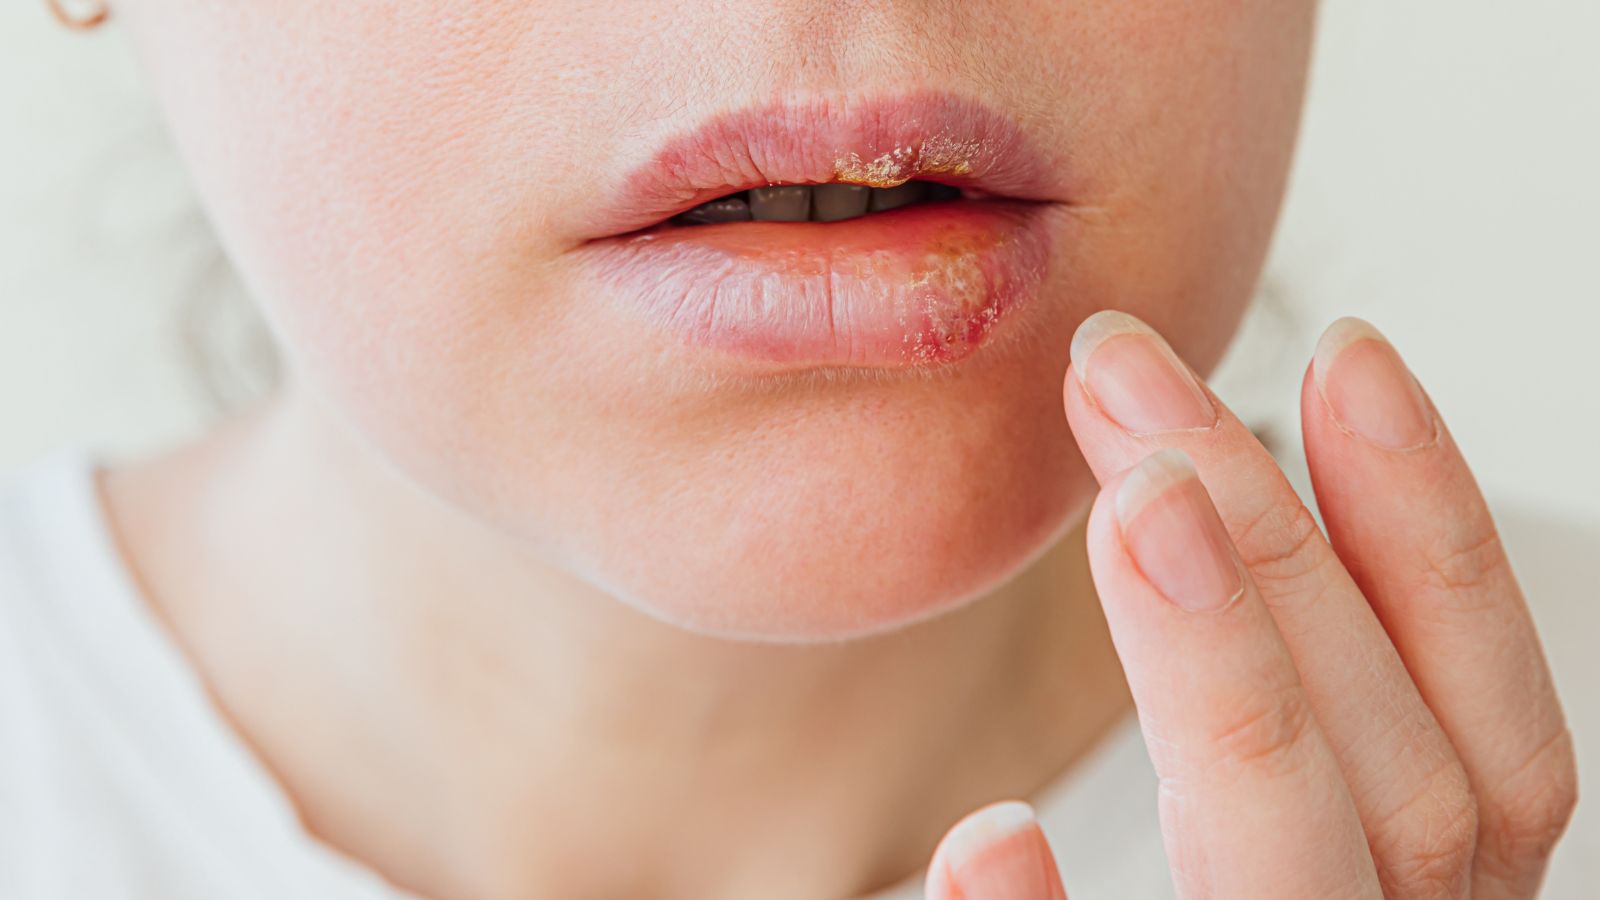 A young woman touched her face because her lips herpes hurt so bad.